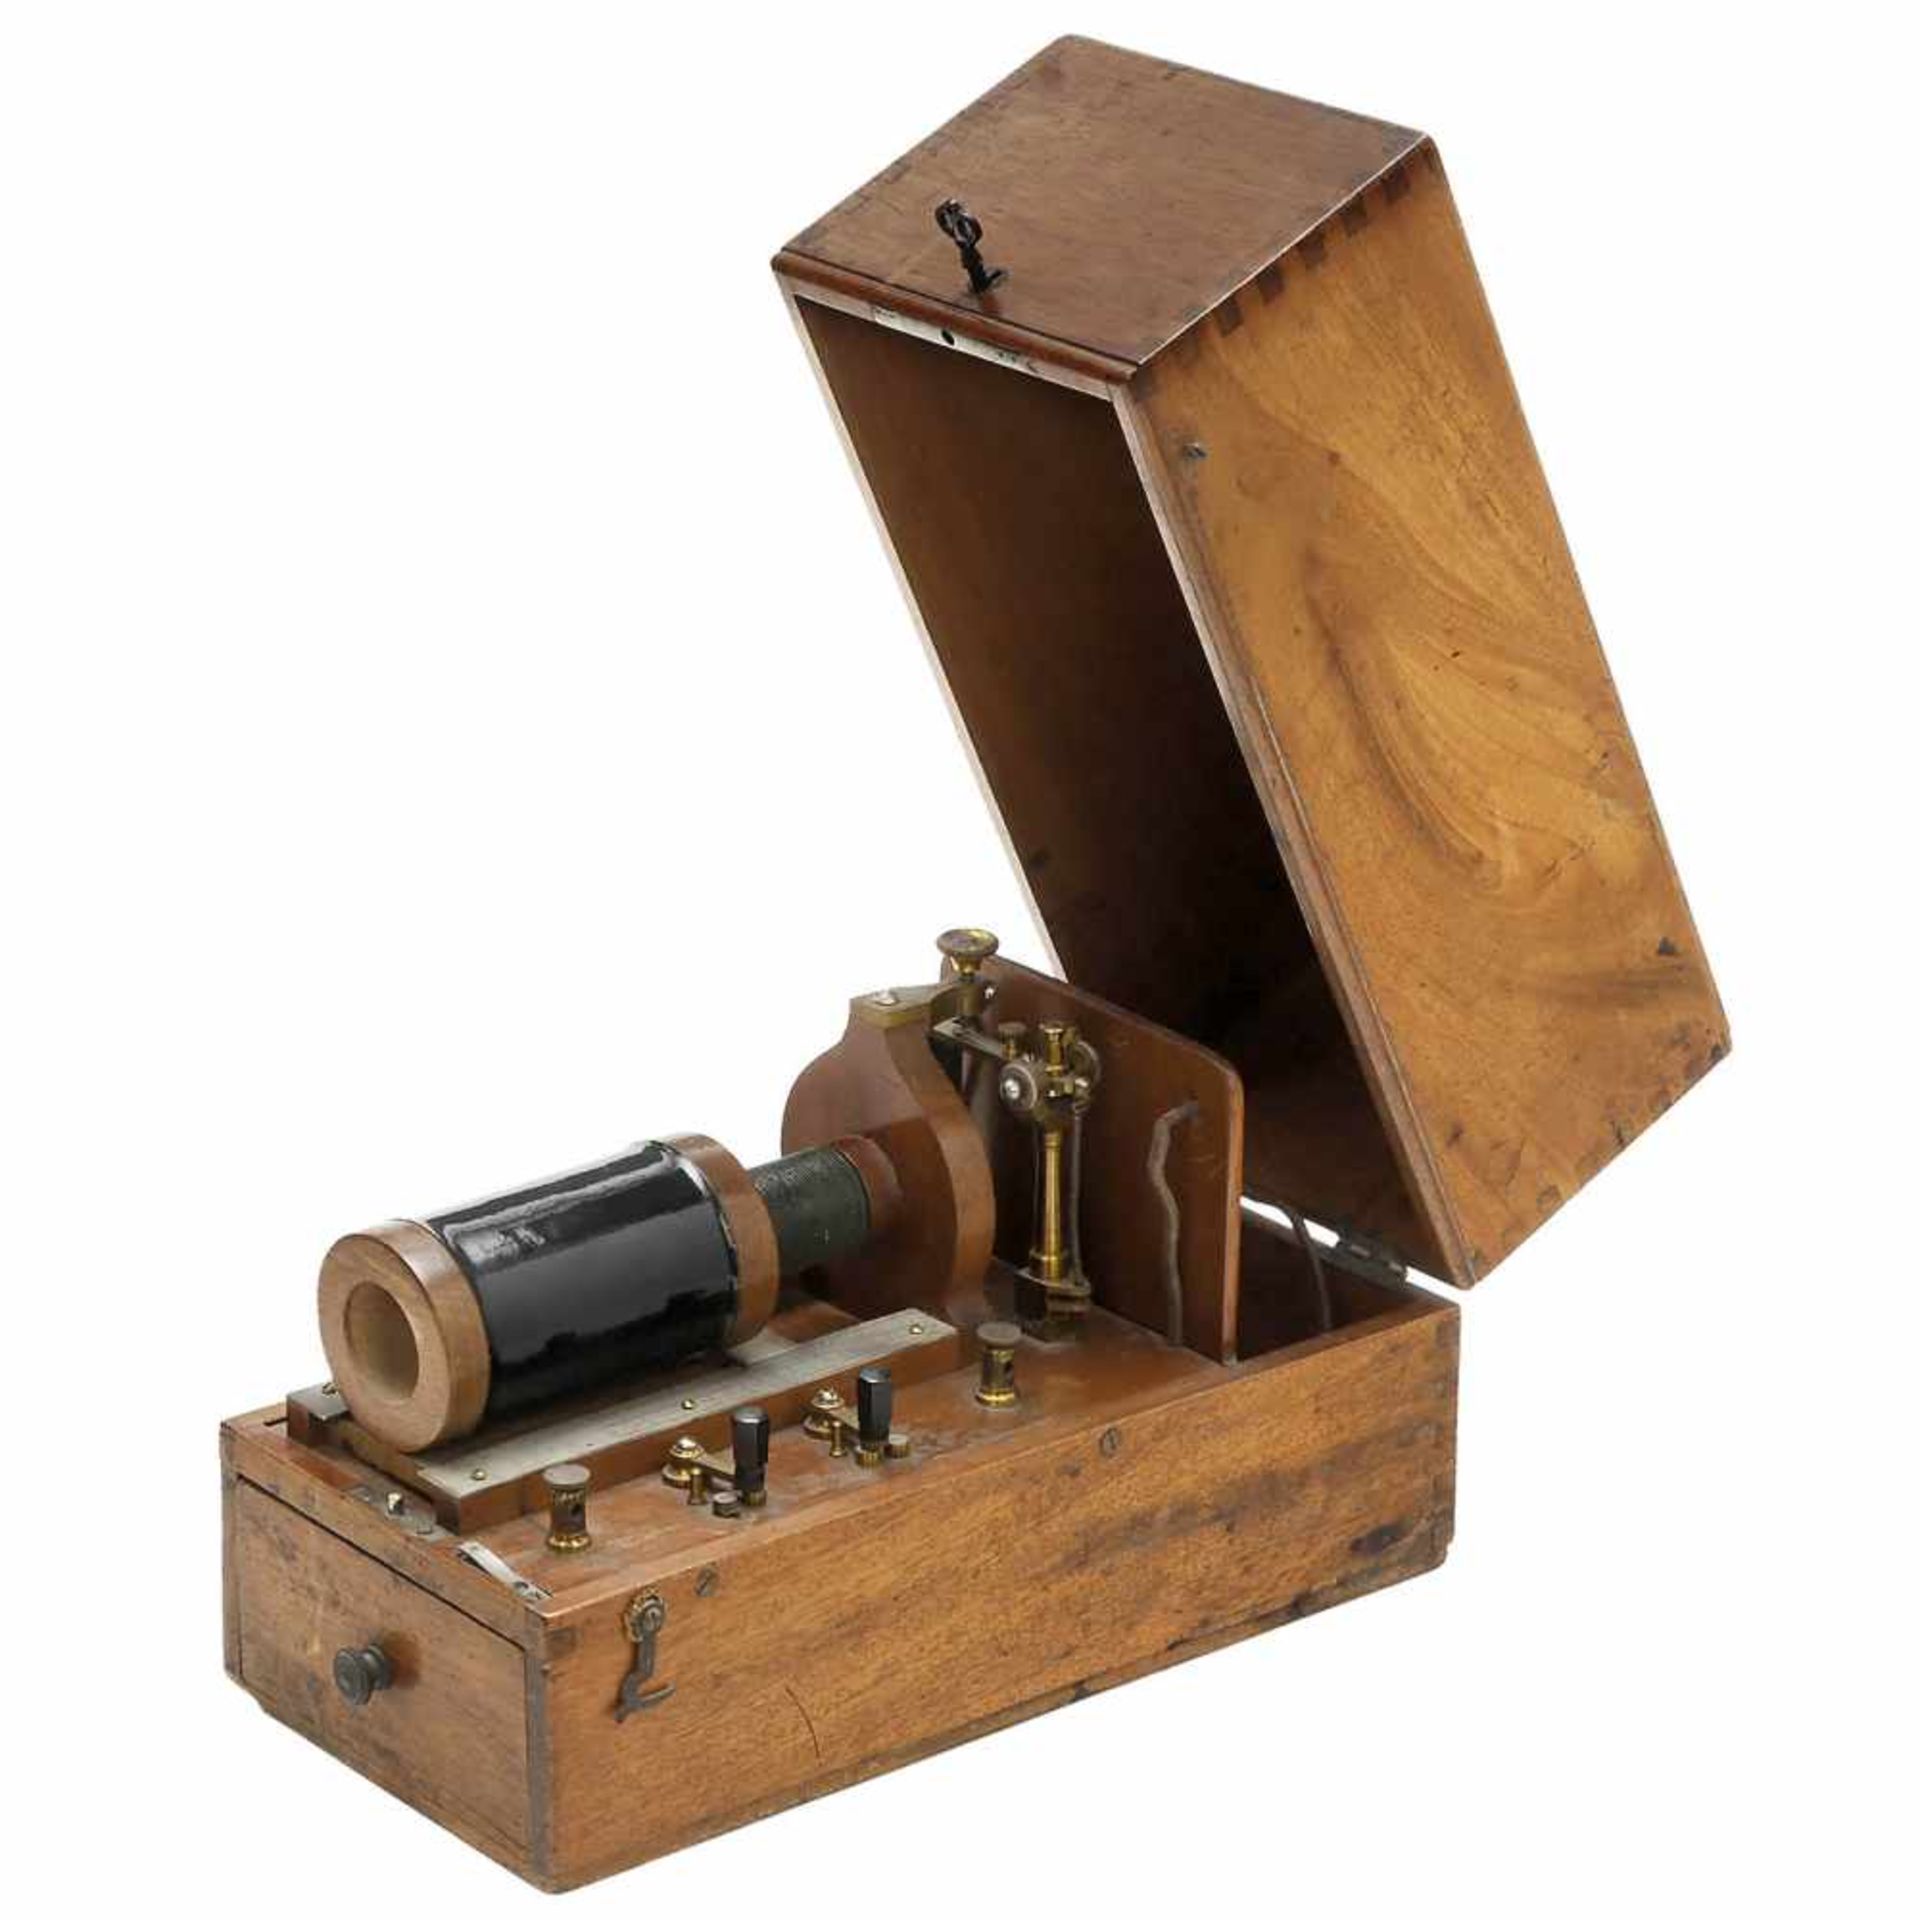 Medical Electrotherapy Device, c. 1900Richard Ch. Heller, Paris. With sliding induction coil, walnut